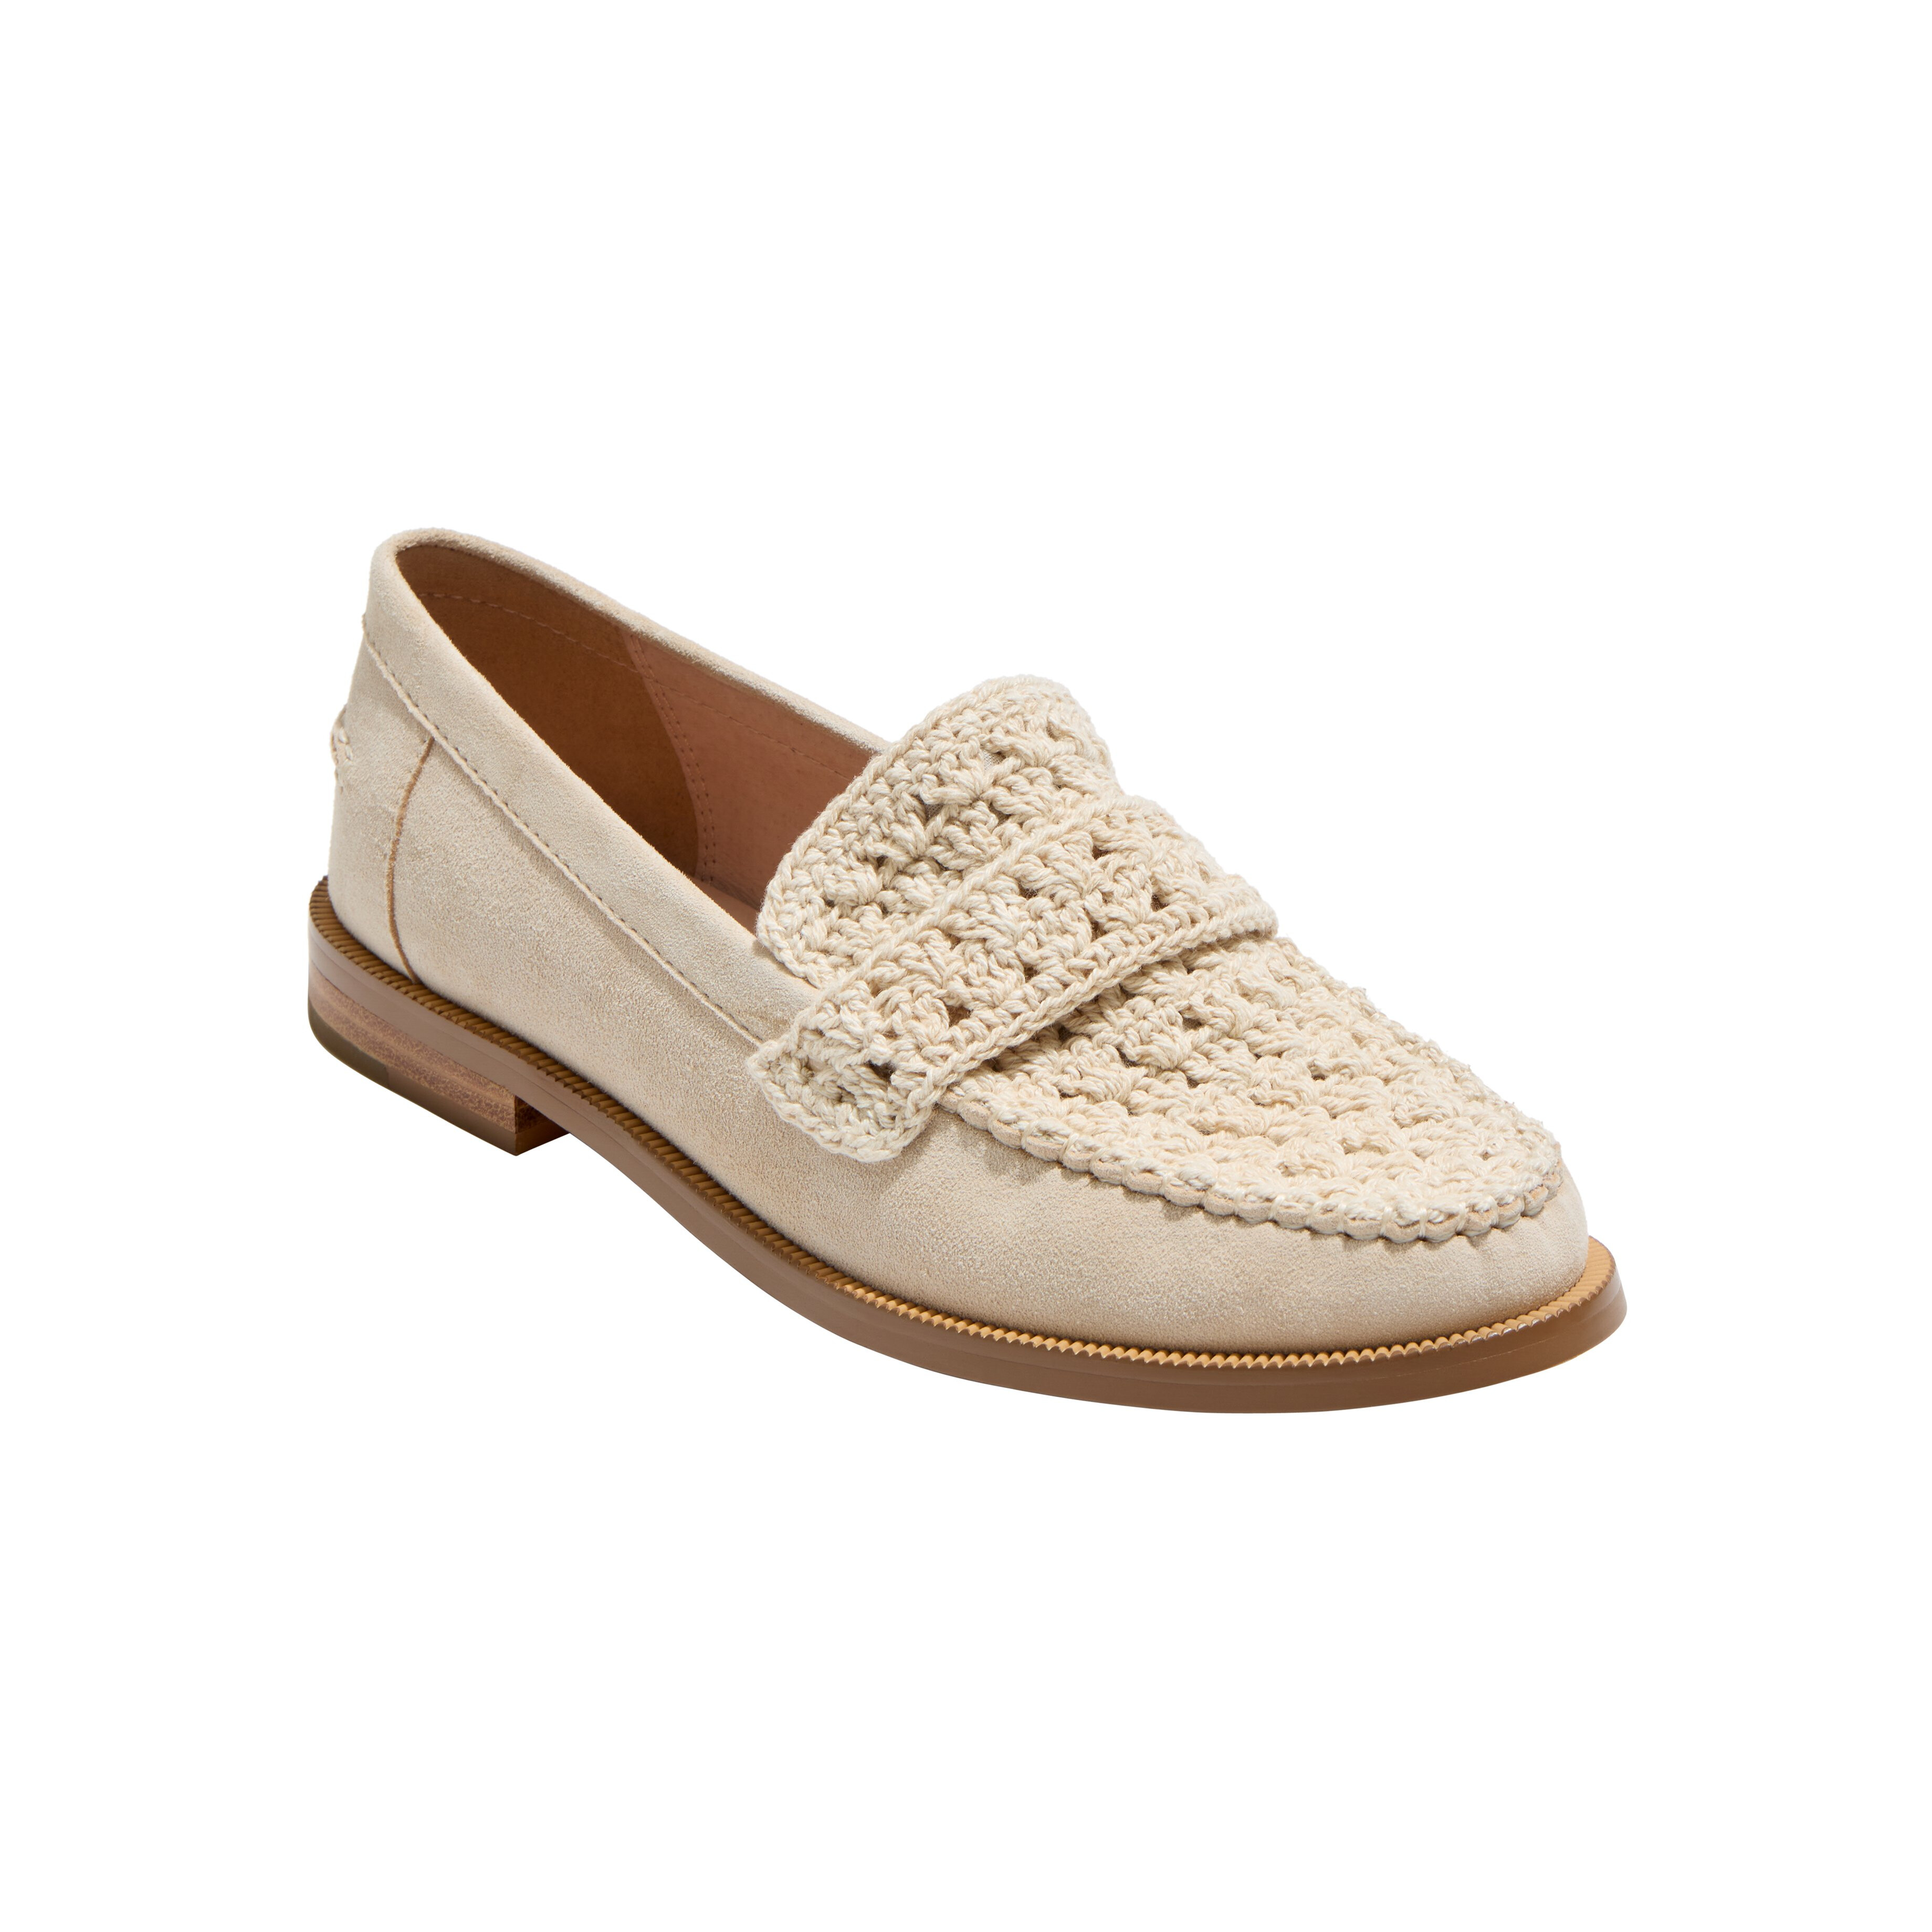 Incaltaminte Femei Jack Rogers Dale Loafer - CrochetSuede Natural